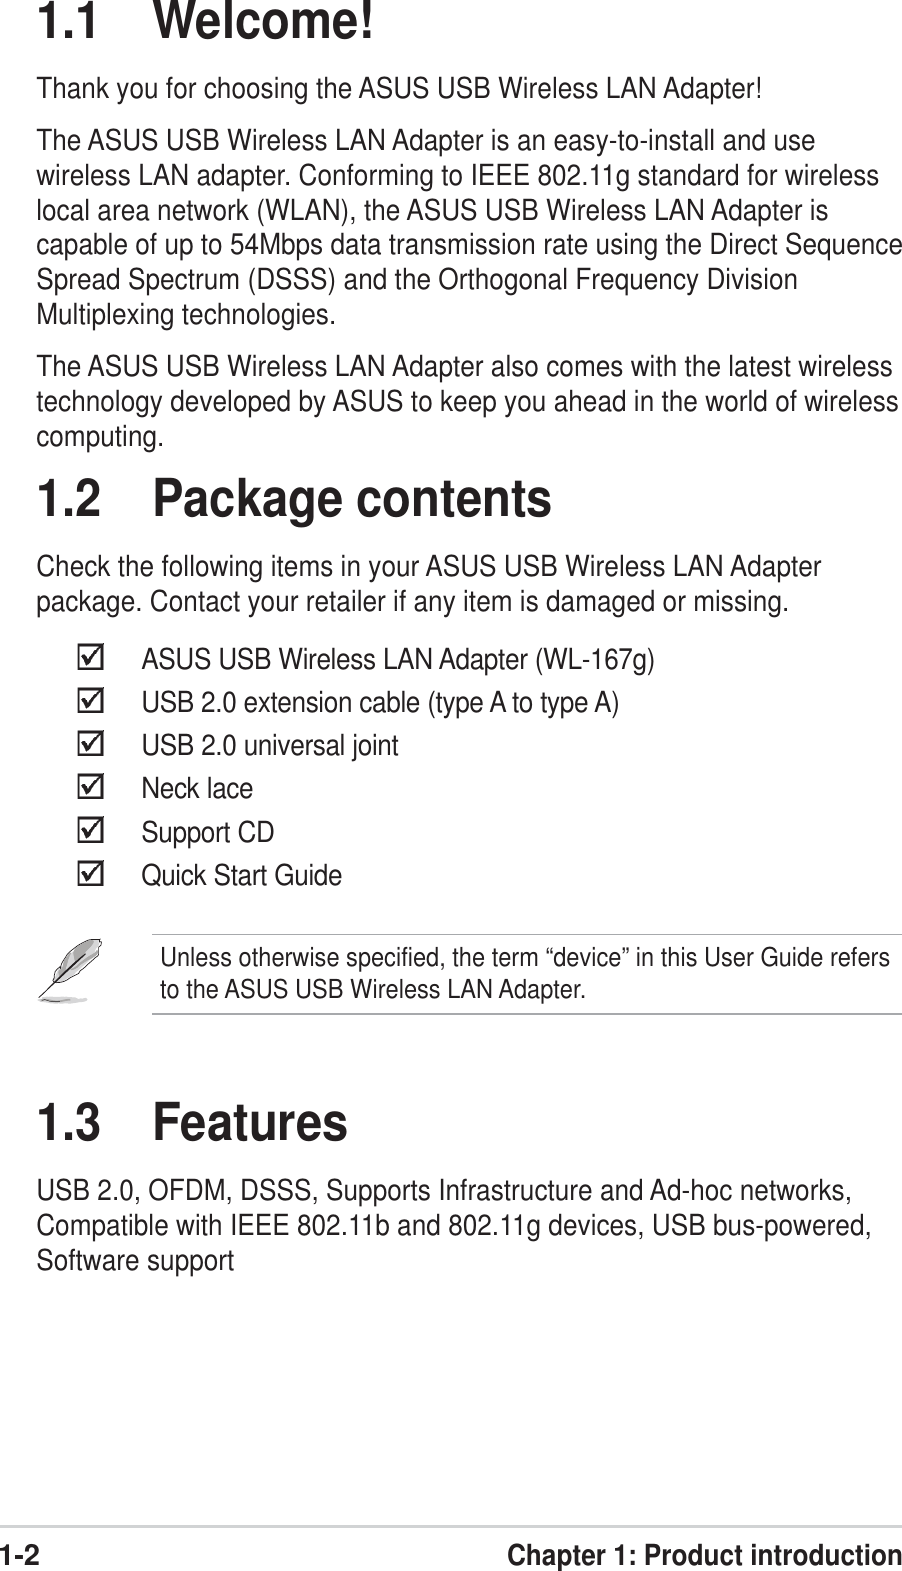 1-2Chapter 1: Product introduction1.1 Welcome!Thank you for choosing the ASUS USB Wireless LAN Adapter!The ASUS USB Wireless LAN Adapter is an easy-to-install and usewireless LAN adapter. Conforming to IEEE 802.11g standard for wirelesslocal area network (WLAN), the ASUS USB Wireless LAN Adapter iscapable of up to 54Mbps data transmission rate using the Direct SequenceSpread Spectrum (DSSS) and the Orthogonal Frequency DivisionMultiplexing technologies.The ASUS USB Wireless LAN Adapter also comes with the latest wirelesstechnology developed by ASUS to keep you ahead in the world of wirelesscomputing.1.2 Package contentsCheck the following items in your ASUS USB Wireless LAN Adapterpackage. Contact your retailer if any item is damaged or missing.ASUS USB Wireless LAN Adapter (WL-167g)USB 2.0 extension cable (type A to type A)USB 2.0 universal jointNeck laceSupport CDQuick Start Guide1.3 FeaturesUSB 2.0, OFDM, DSSS, Supports Infrastructure and Ad-hoc networks,Compatible with IEEE 802.11b and 802.11g devices, USB bus-powered,Software supportUnless otherwise specified, the term “device” in this User Guide refersto the ASUS USB Wireless LAN Adapter.